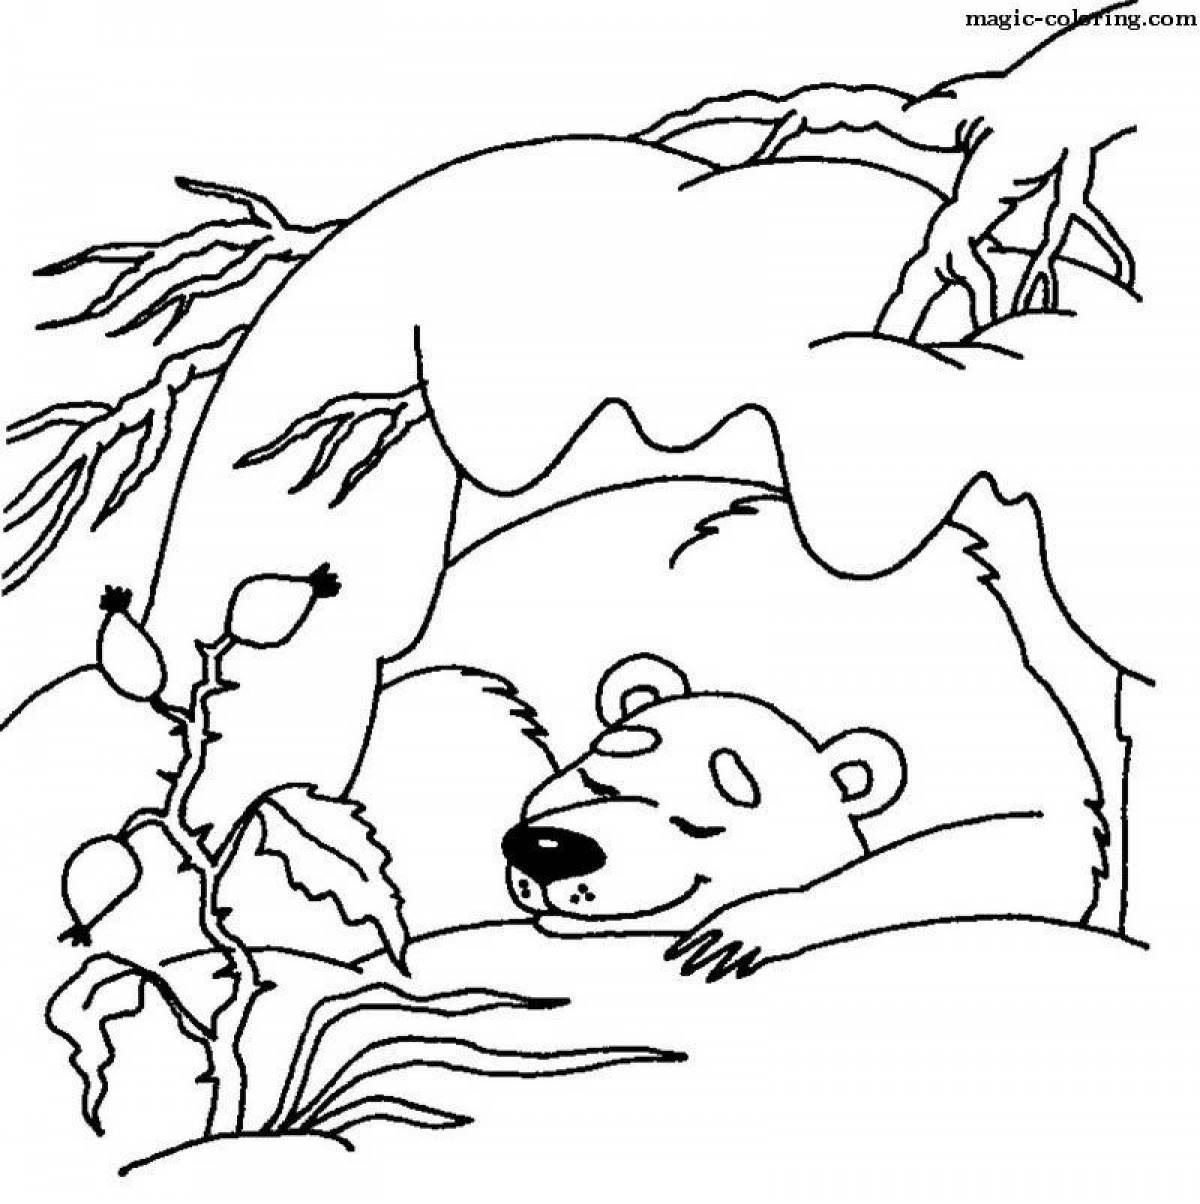 Attracting a bear in a den coloring book